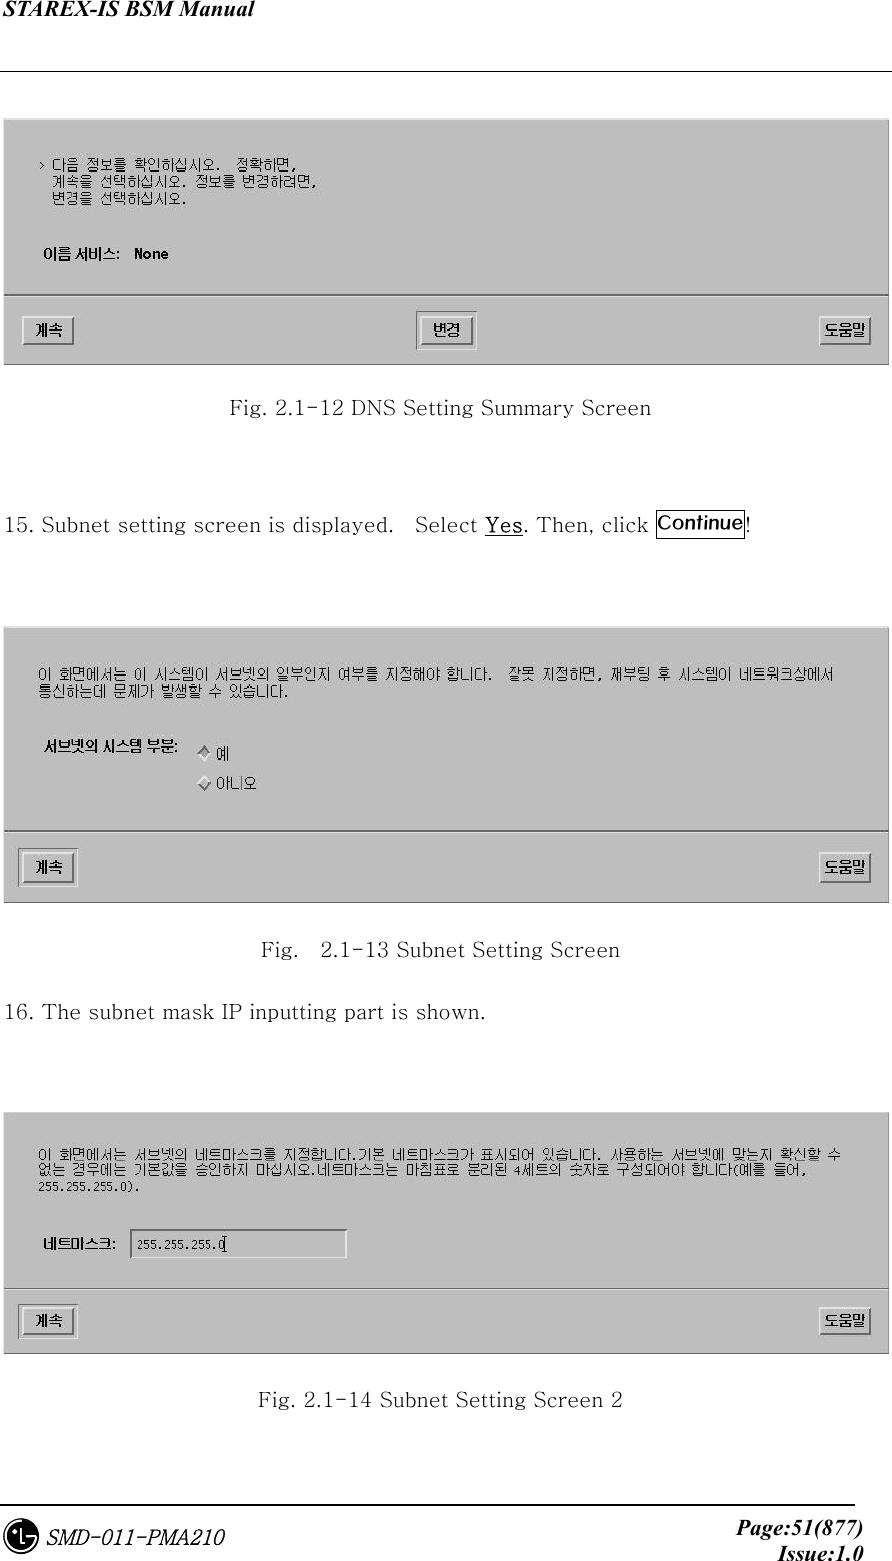 STAREX-IS BSM Manual     Page:51(877)Issue:1.0SMD-011-PMA210   Fig. 2.1-12 DNS Setting Summary Screen  15. Subnet setting screen is displayed.    Select Yes. Then, click Continue!   Fig.    2.1-13 Subnet Setting Screen 16. The subnet mask IP inputting part is shown.   Fig. 2.1-14 Subnet Setting Screen 2 